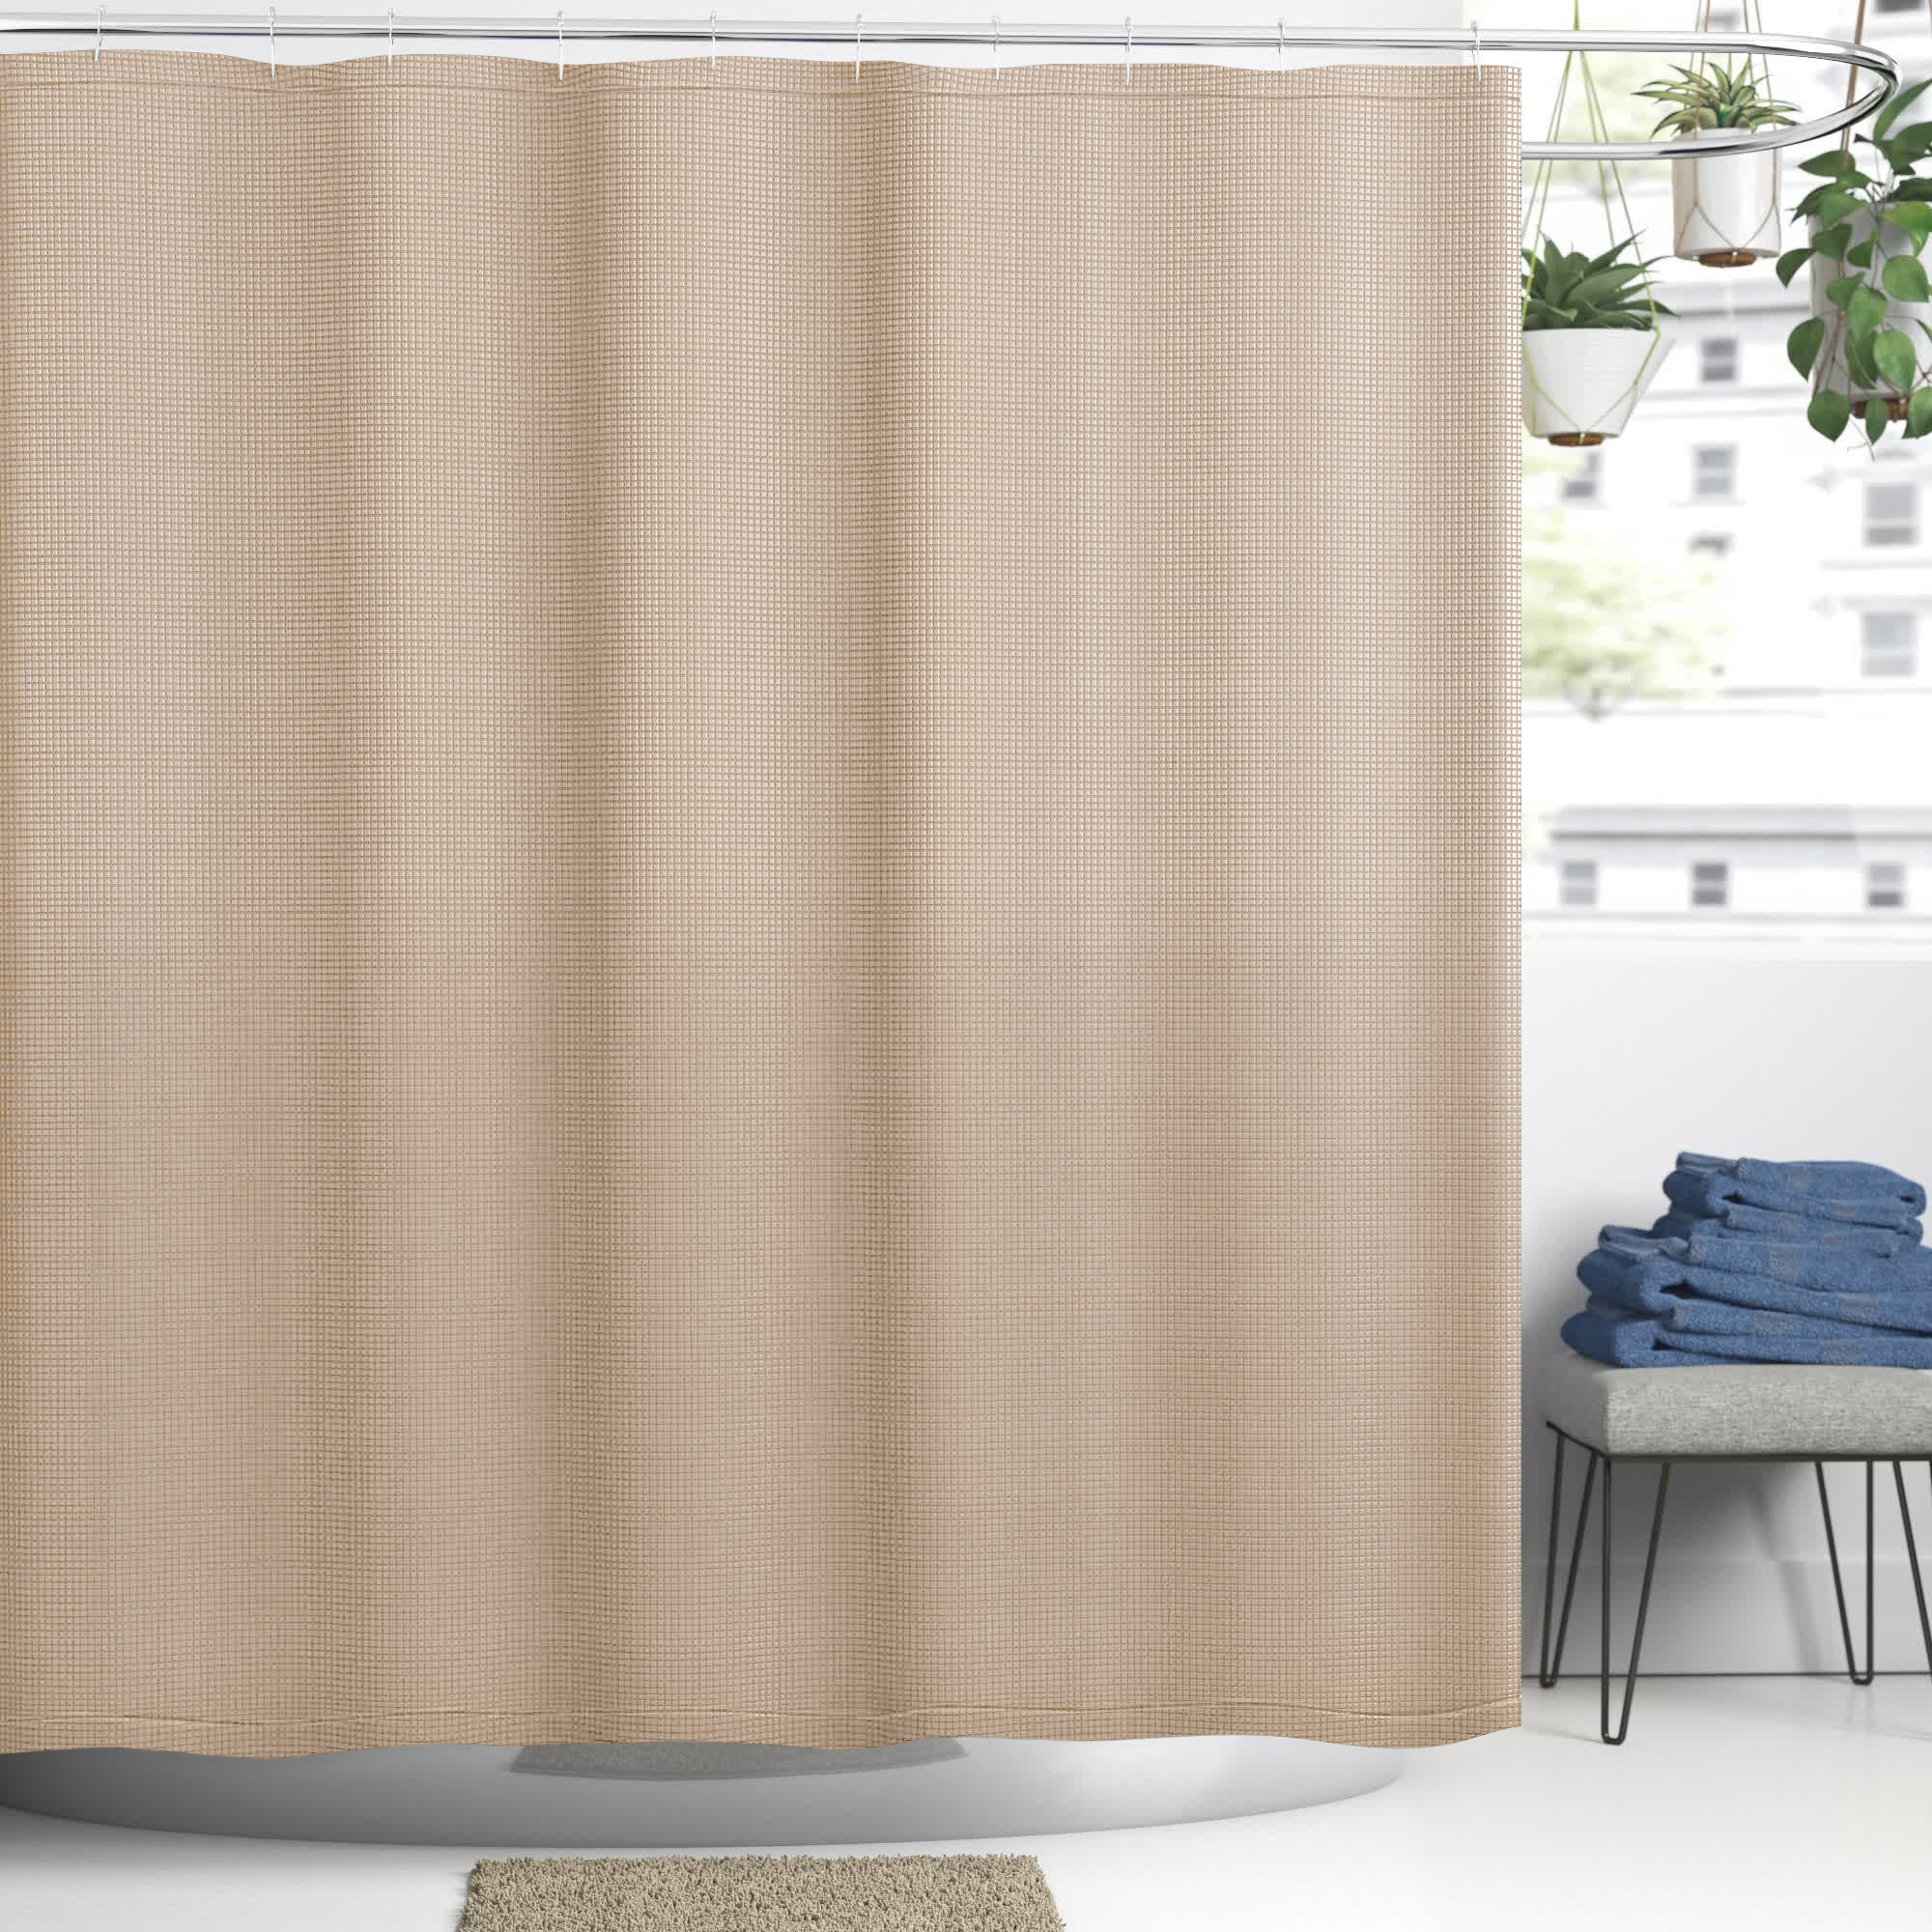 Fine Polyester Bathroom Bubble Curtain Solid Colors Home Window Decoration W 